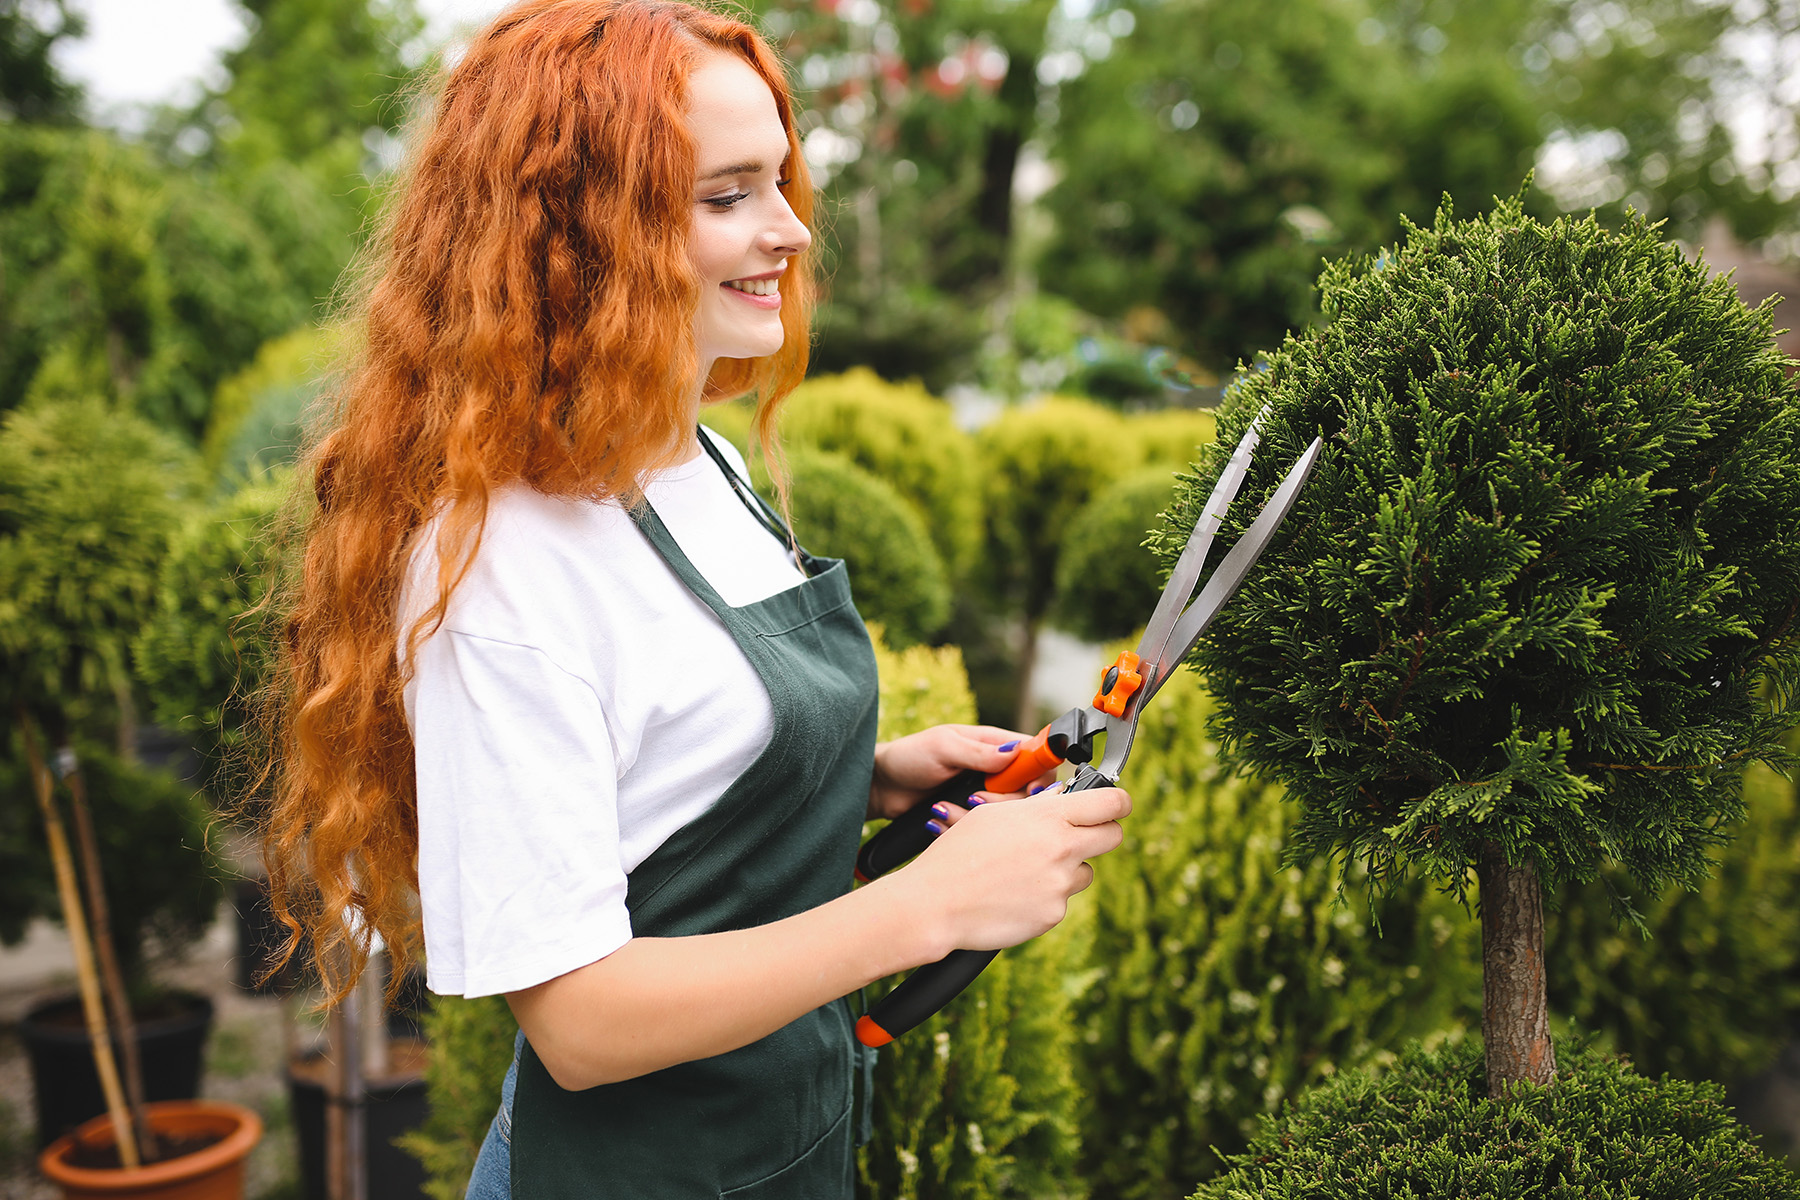 Foto: beautiful-smiling-lady-with-redhead-curly-hair-standing-apron-holding-big-garden-scissors-while-working-outdoors